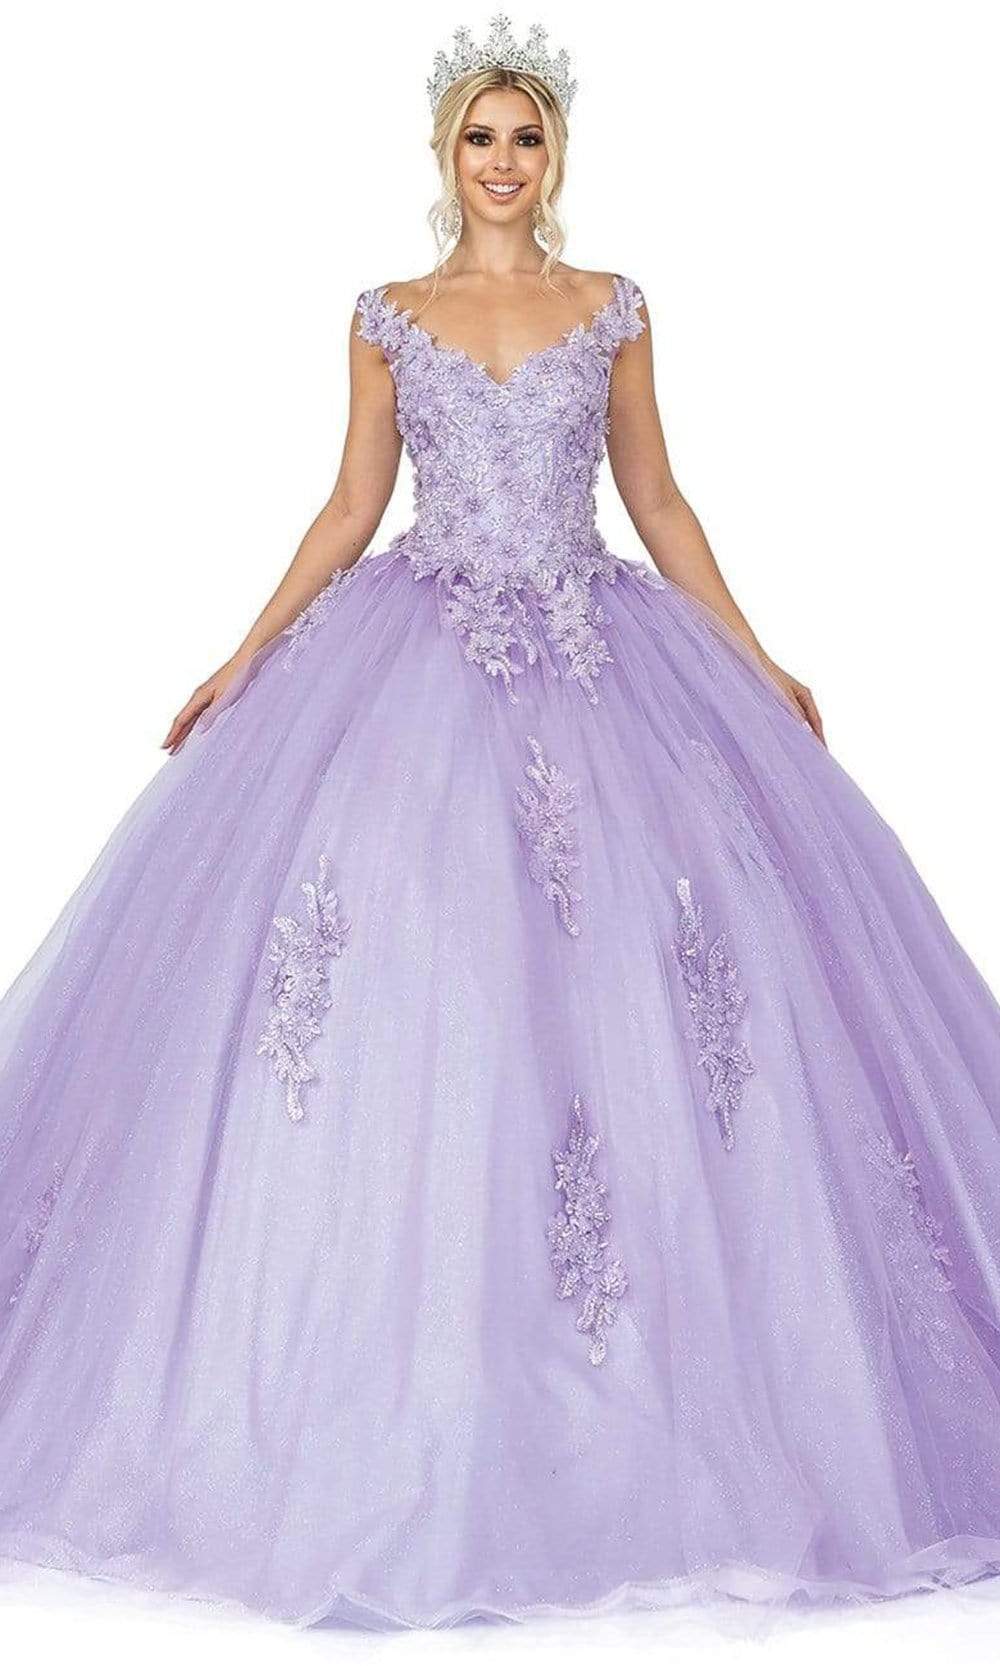 Image of Dancing Queen - 1597 Beaded Floral Lace Applique Tulle Ballgown